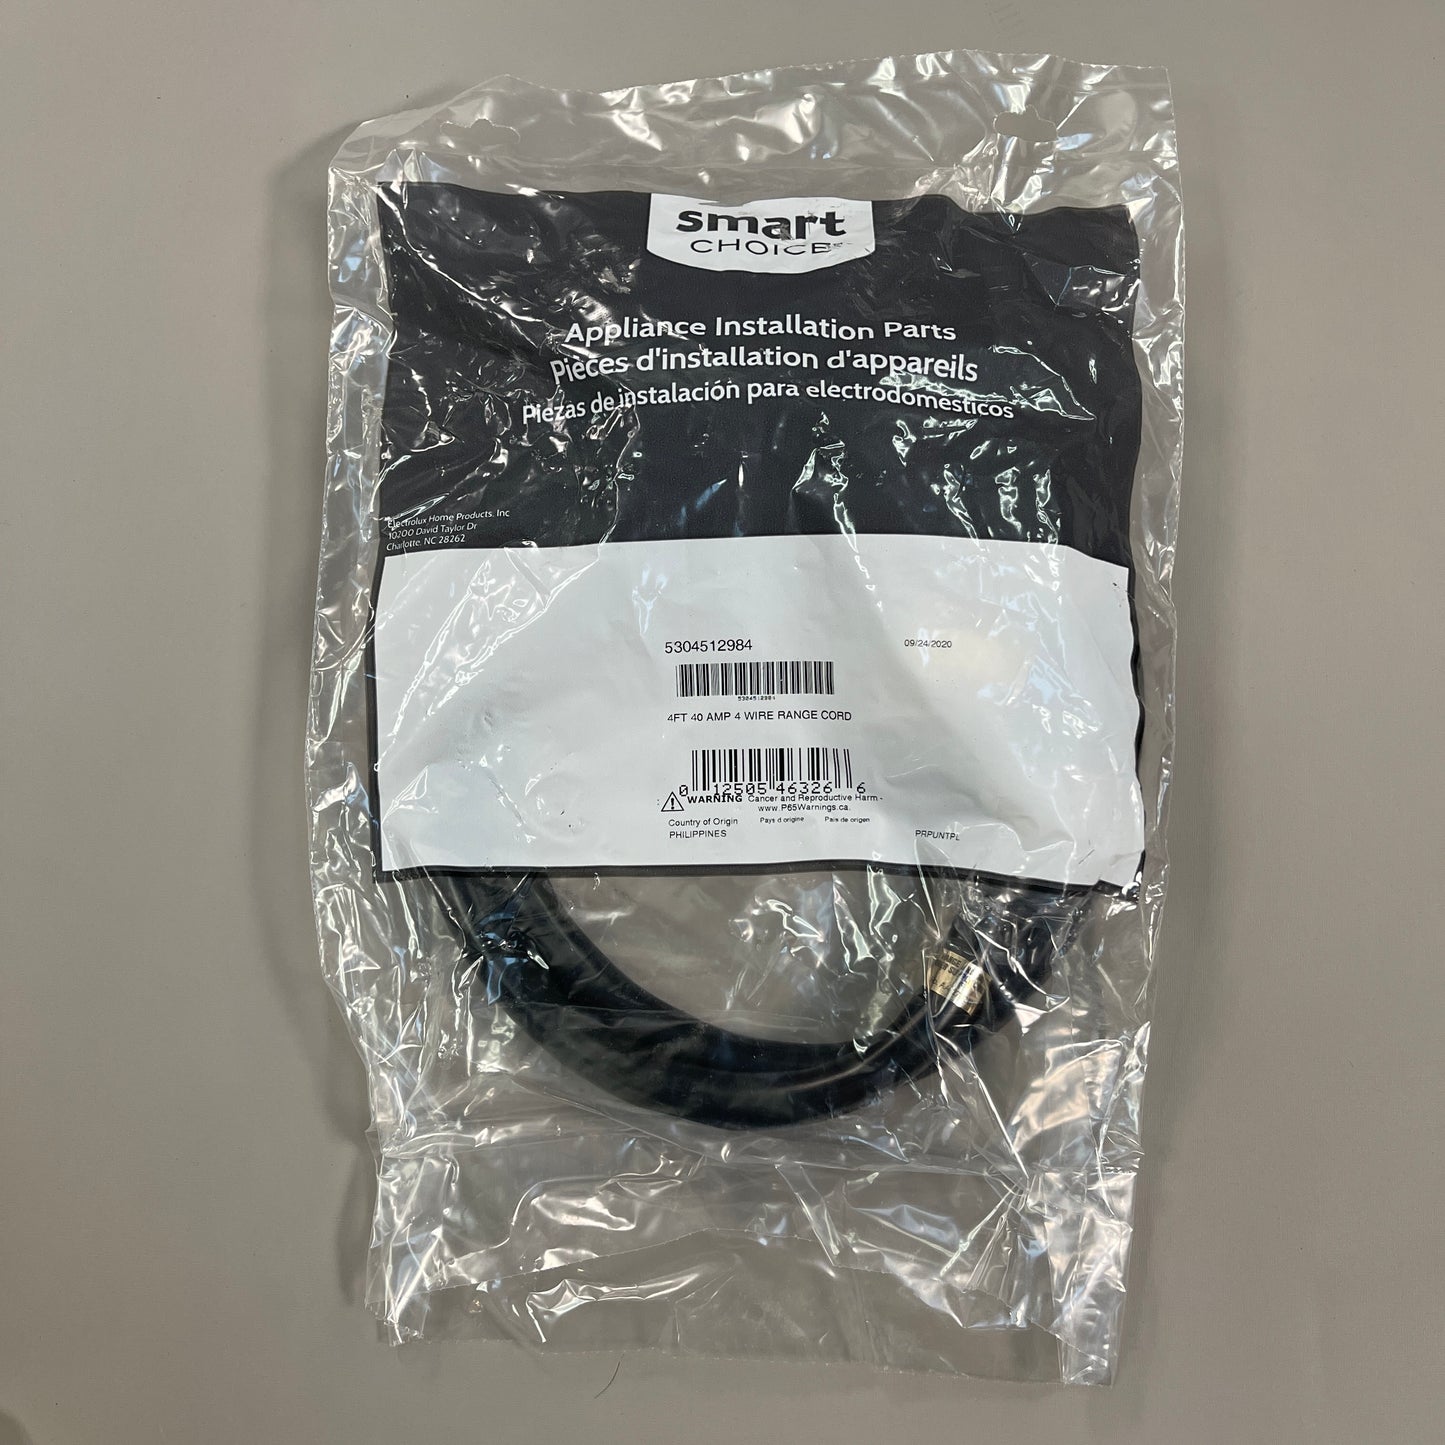 ELECTROLUX Smart Choice 40 AMP 4-Wire Range Black Cord (4 ft) 5304512984 (New)